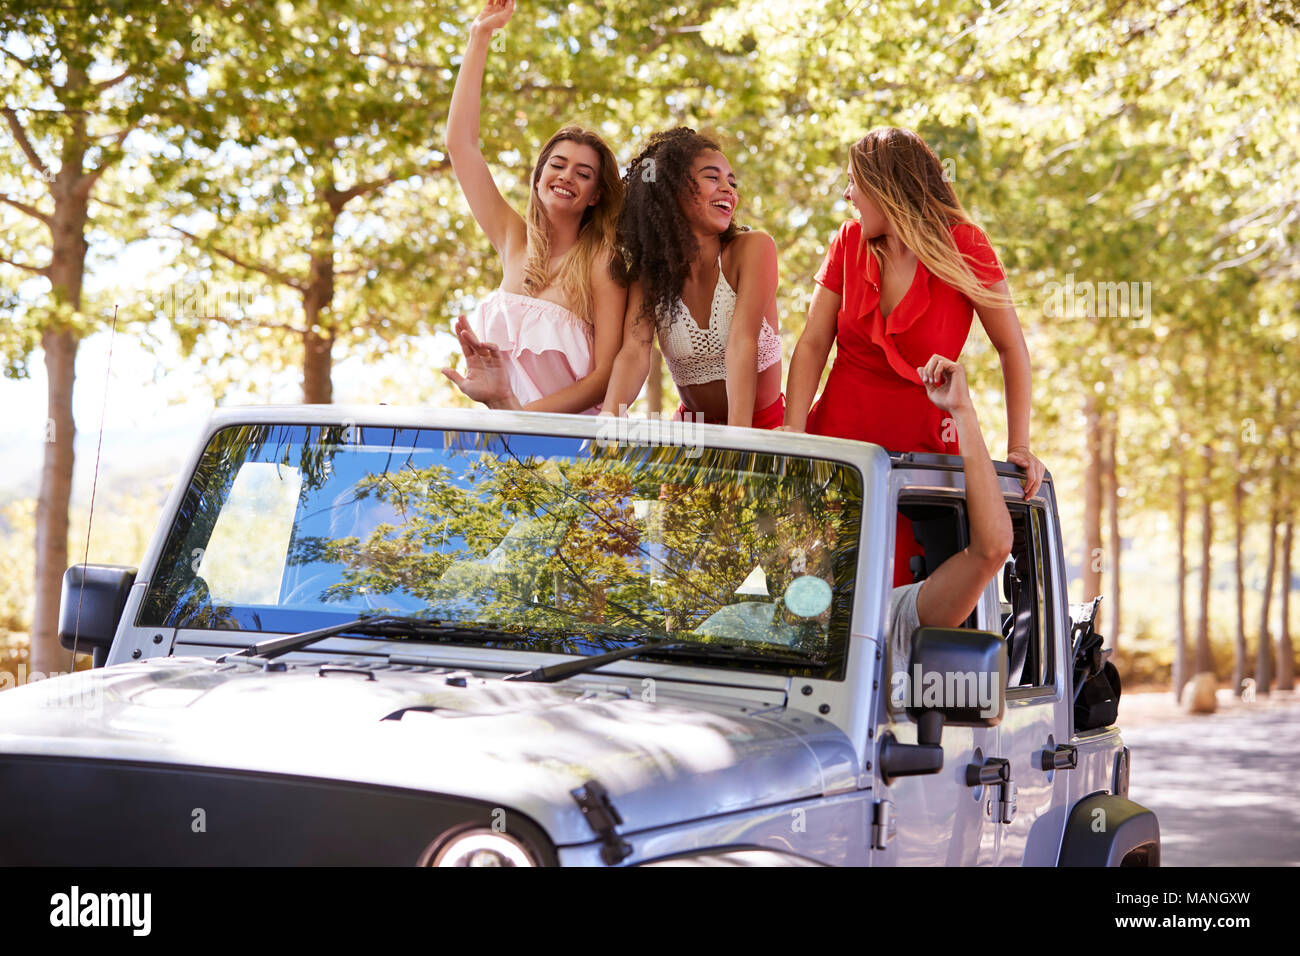 Friends driving on empty road in an open top jeep, close up Stock Photo